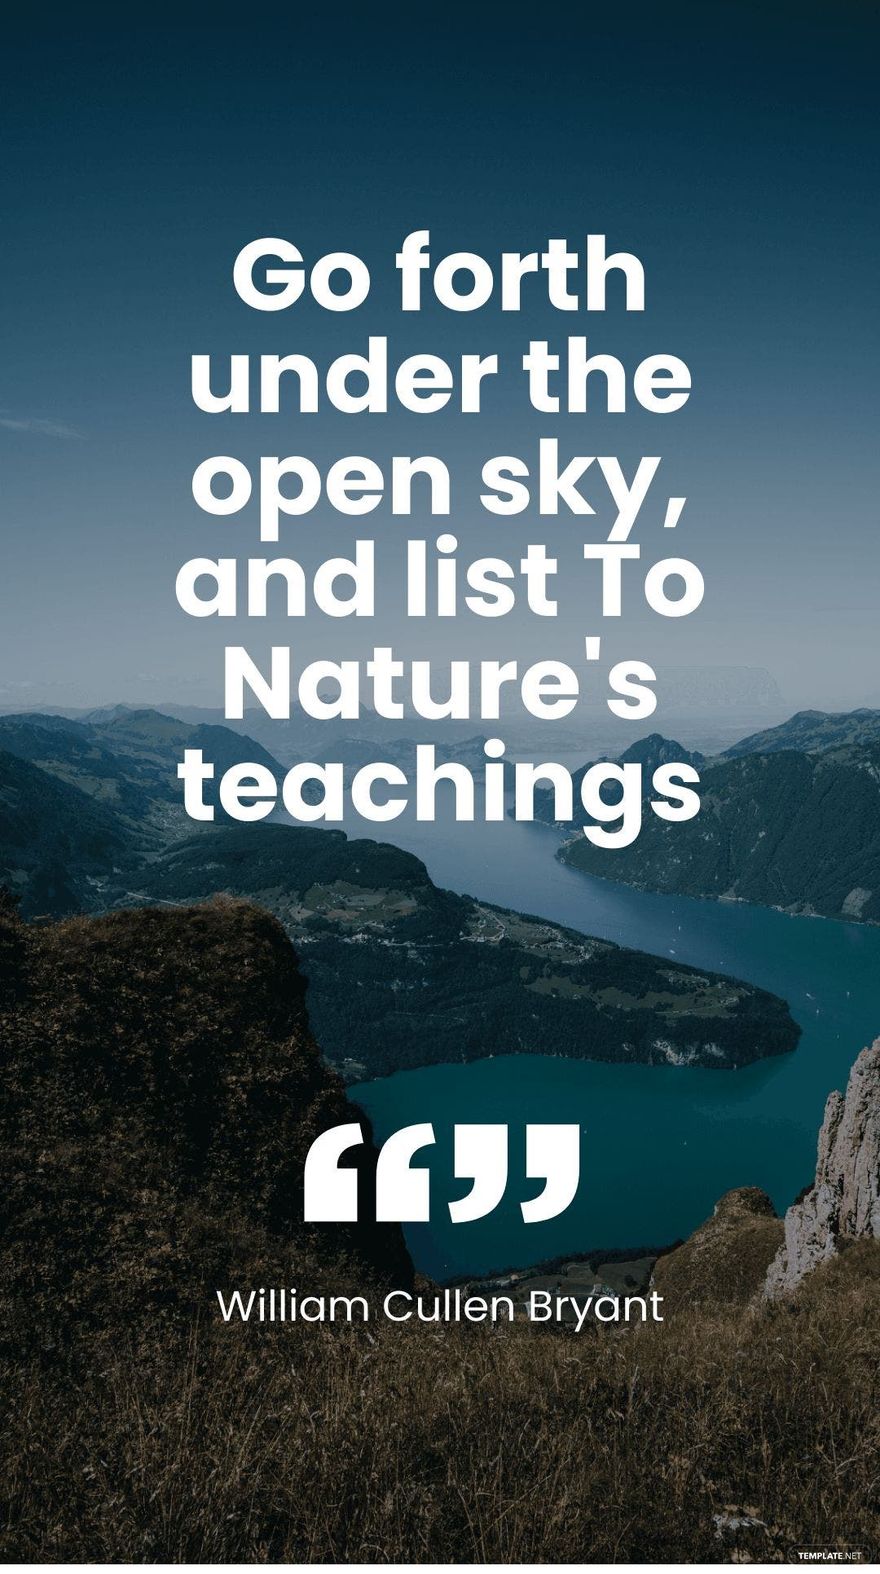 William Cullen Bryant - Go forth under the open sky, and list To Nature's teachings. in JPG